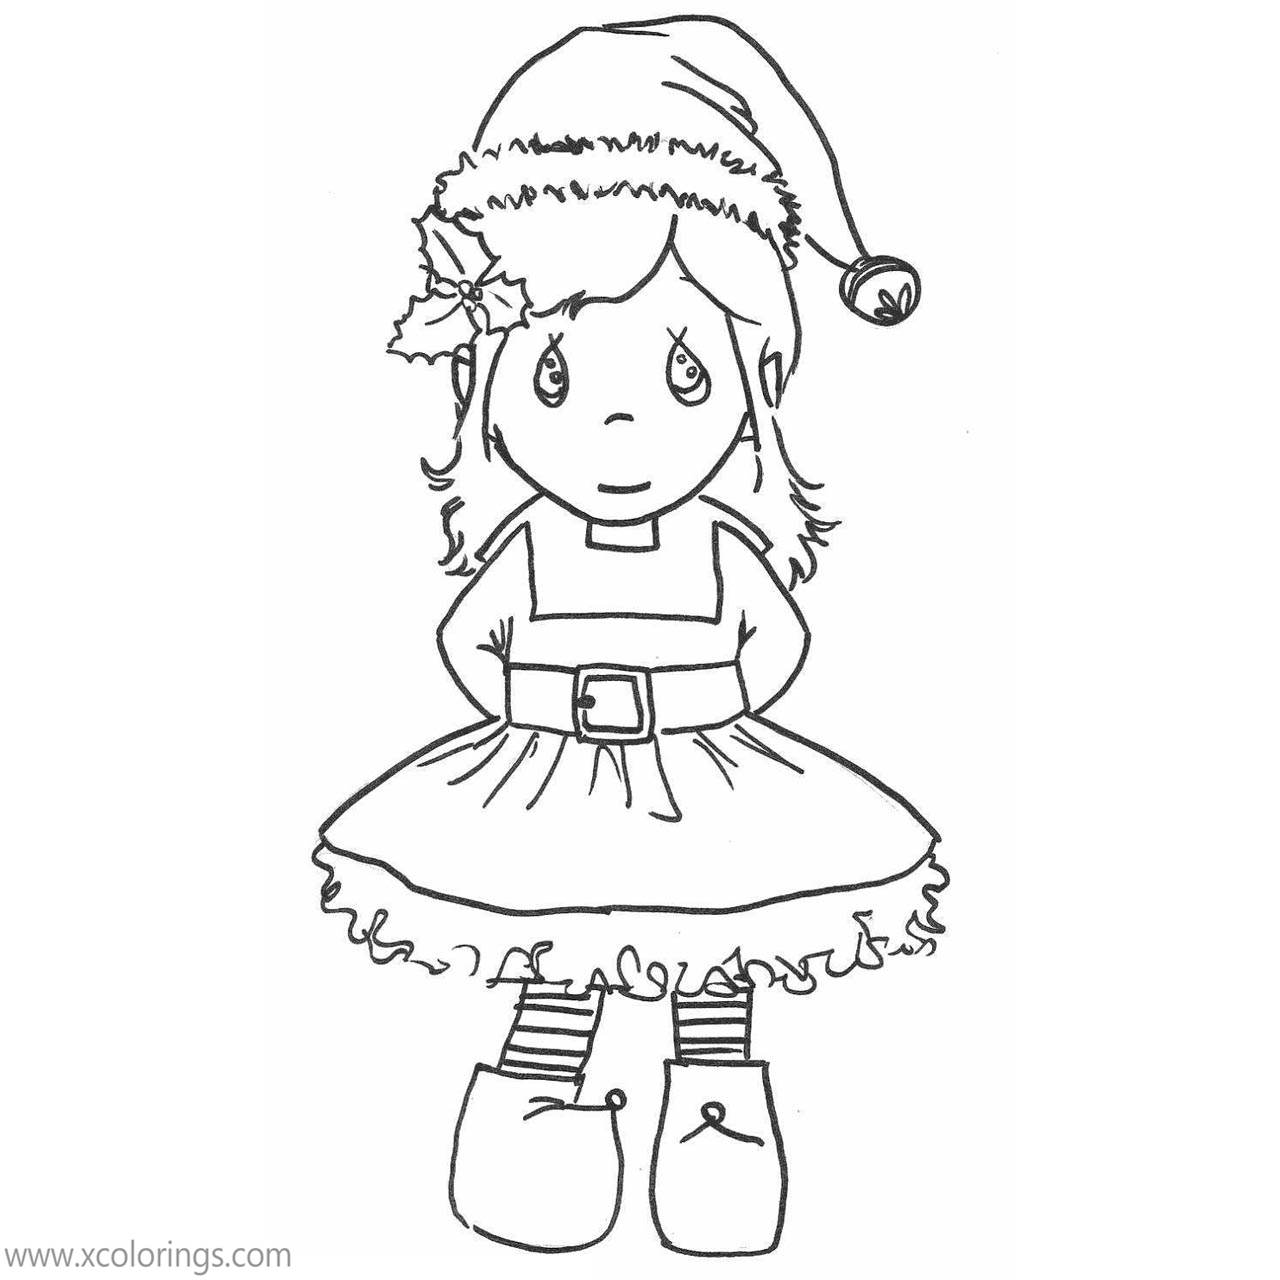 Elf On The Shelf Dolls Coloring Pages - XColorings.com